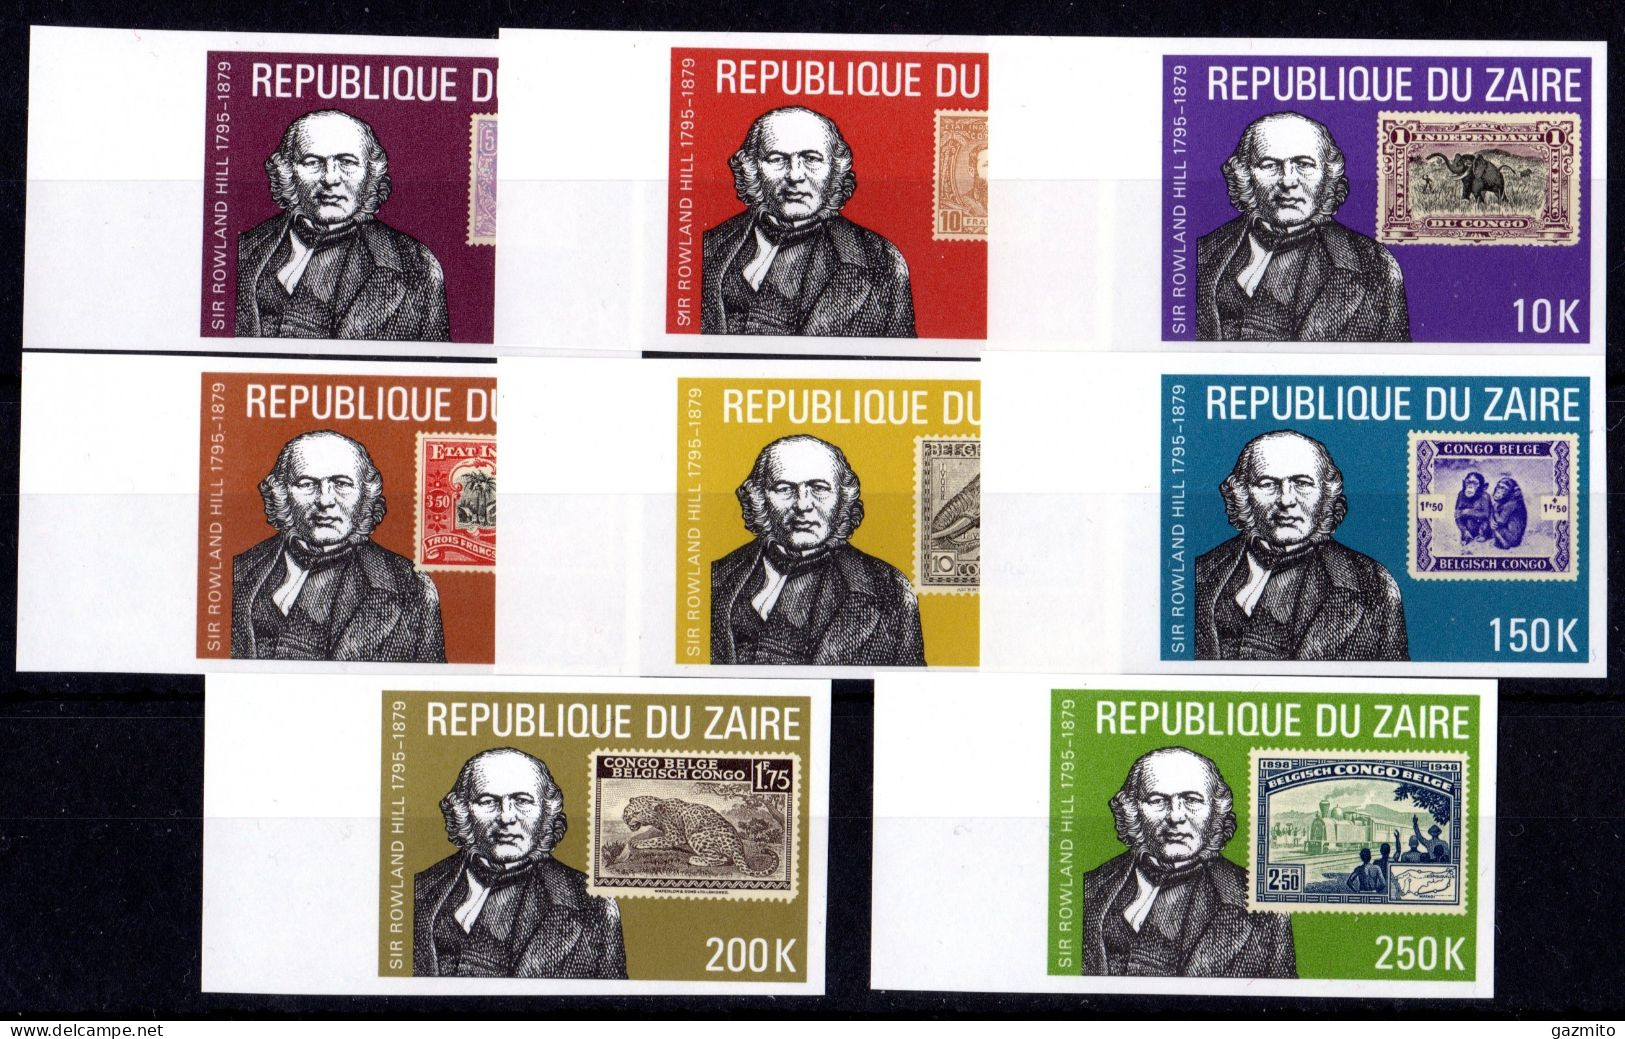 Zaire 1980, Rowland Hill, Stamp On Stamp, Wild Cat, Monkey, Elephant, 8val IMPERFORATED - Rowland Hill